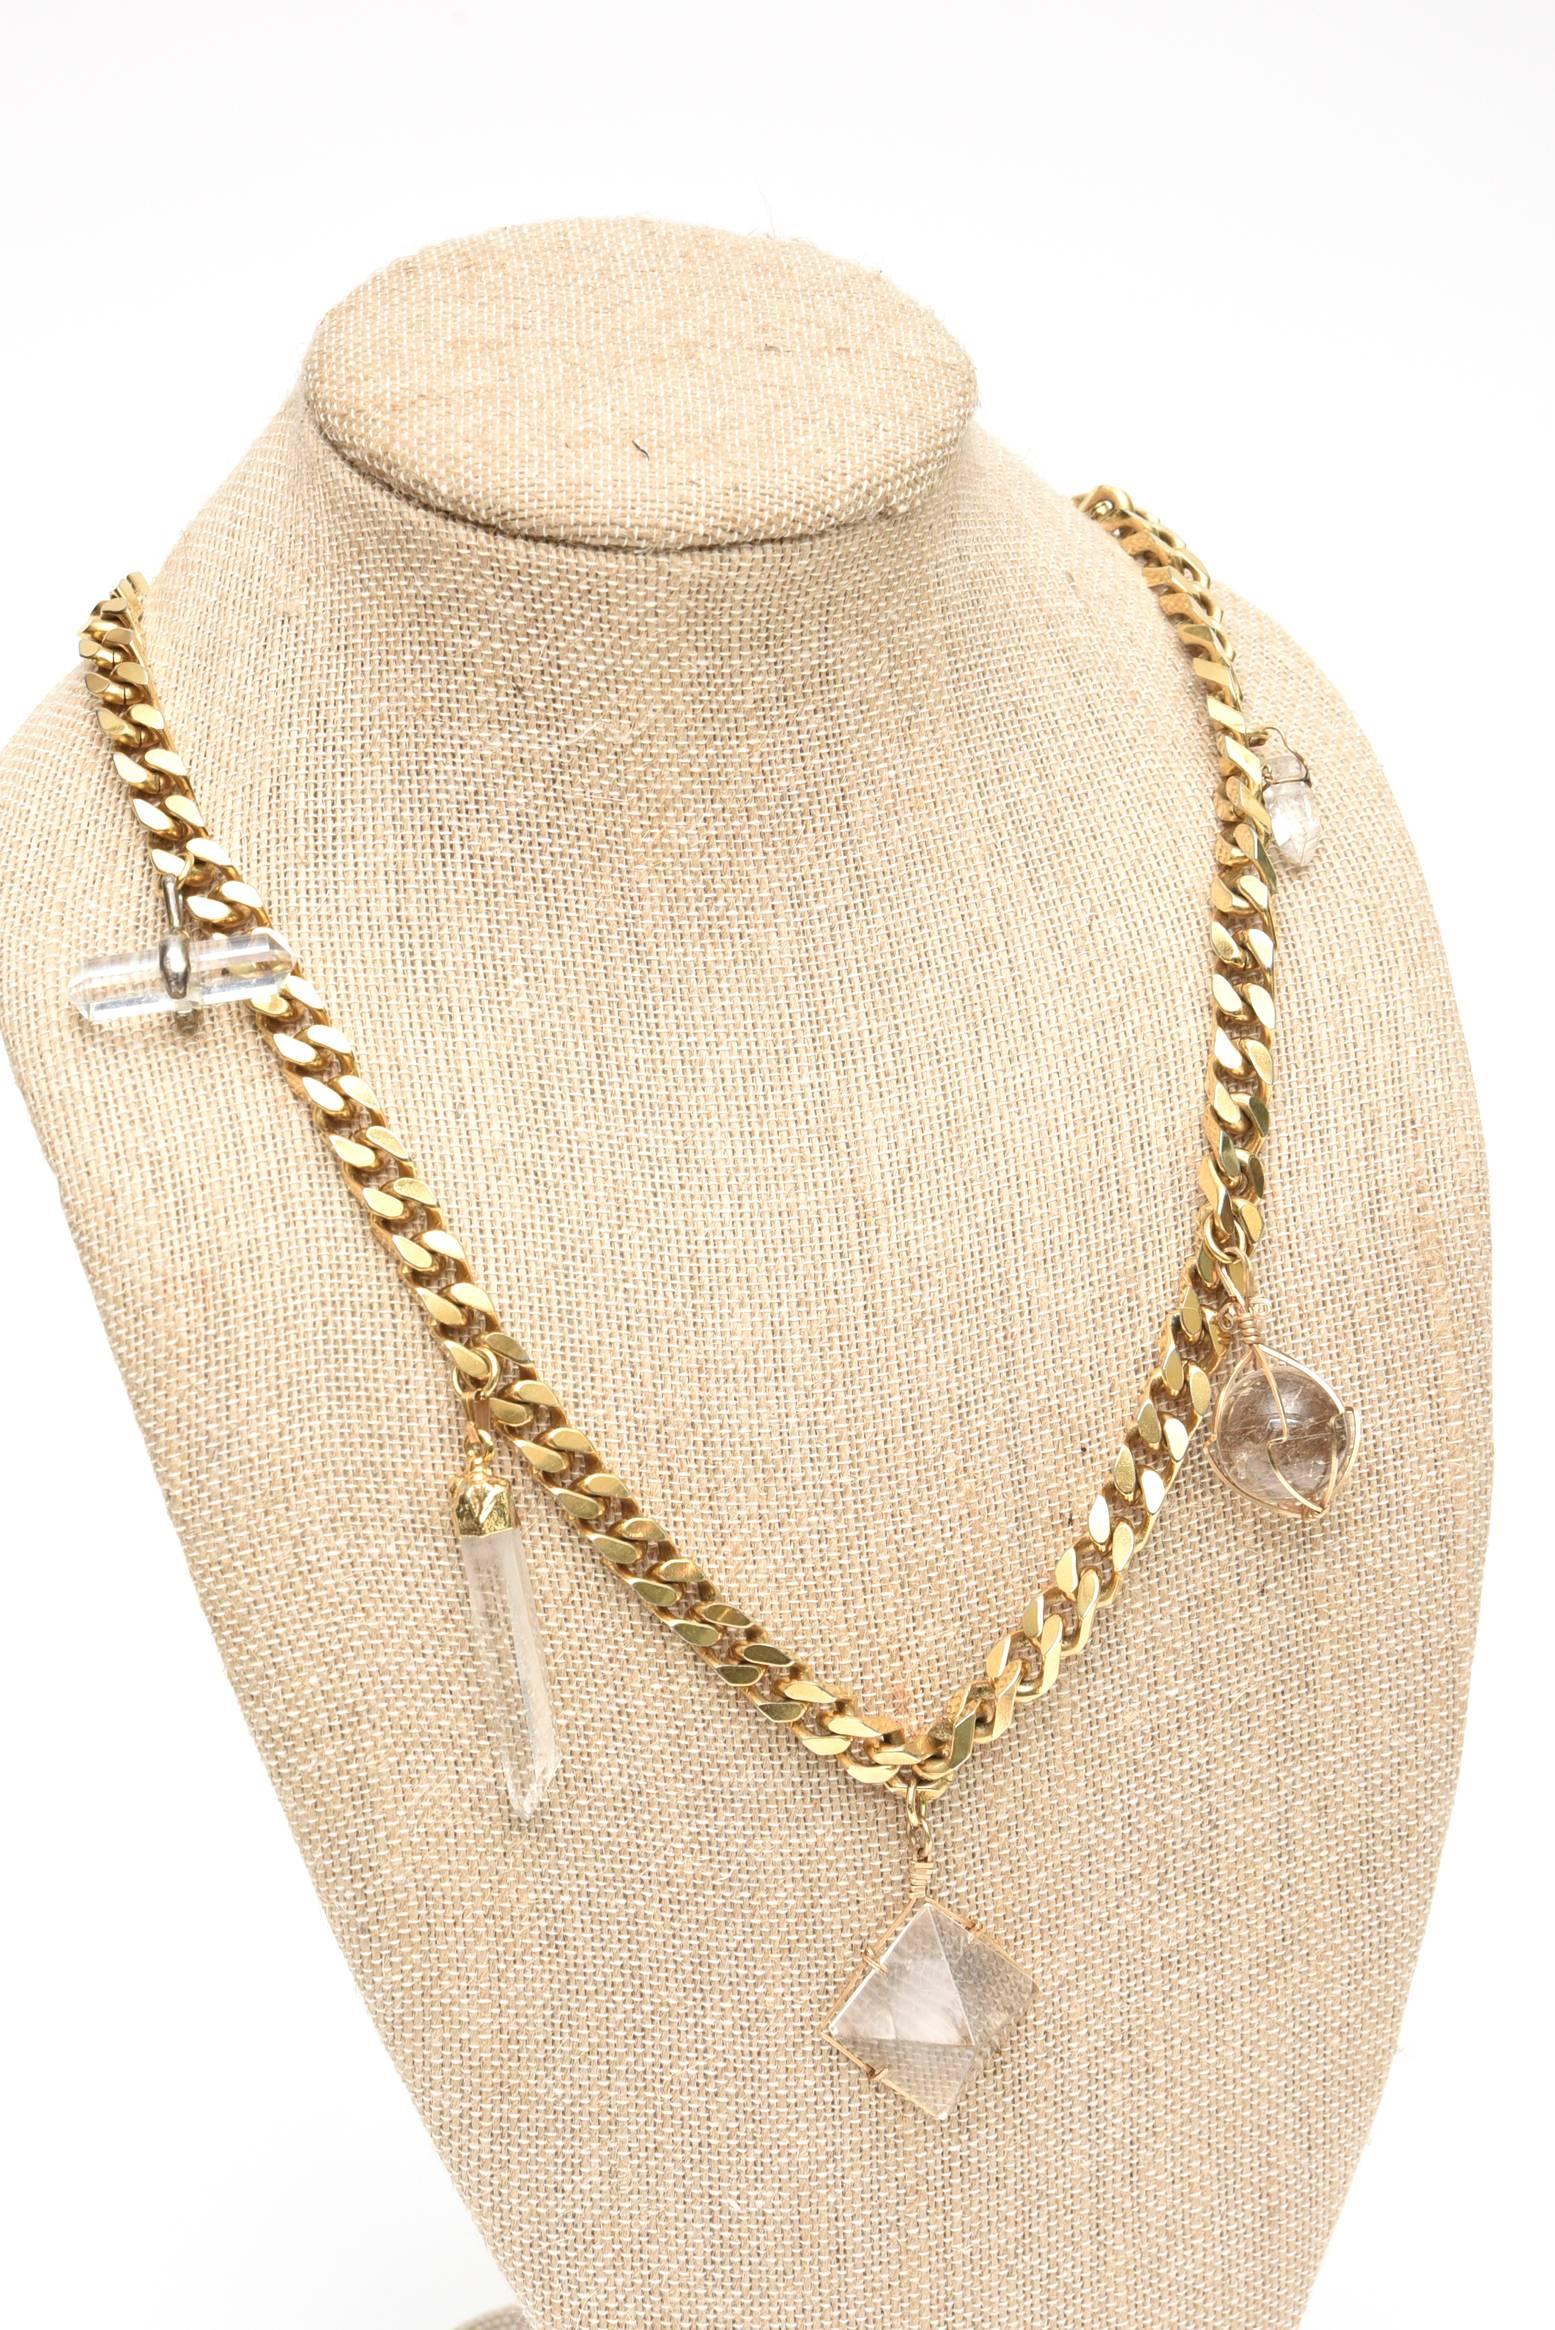 Modern Napier Chain and Crystal Pendant Link Necklace Vintage For Sale